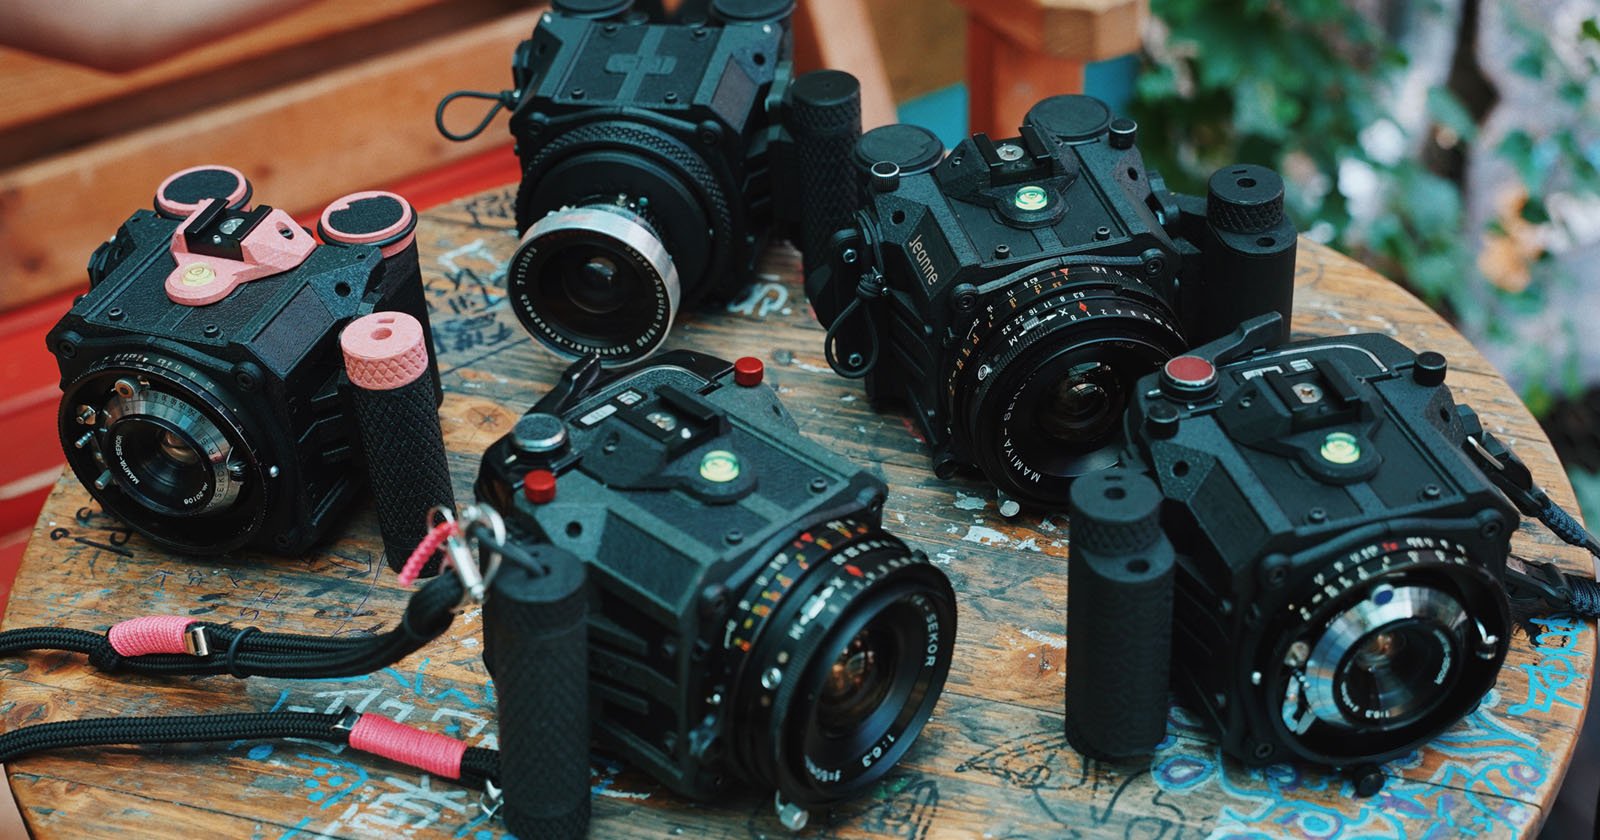 1 Camera in 9 Forms: How the Goodman Zone is Being Used by Photographers